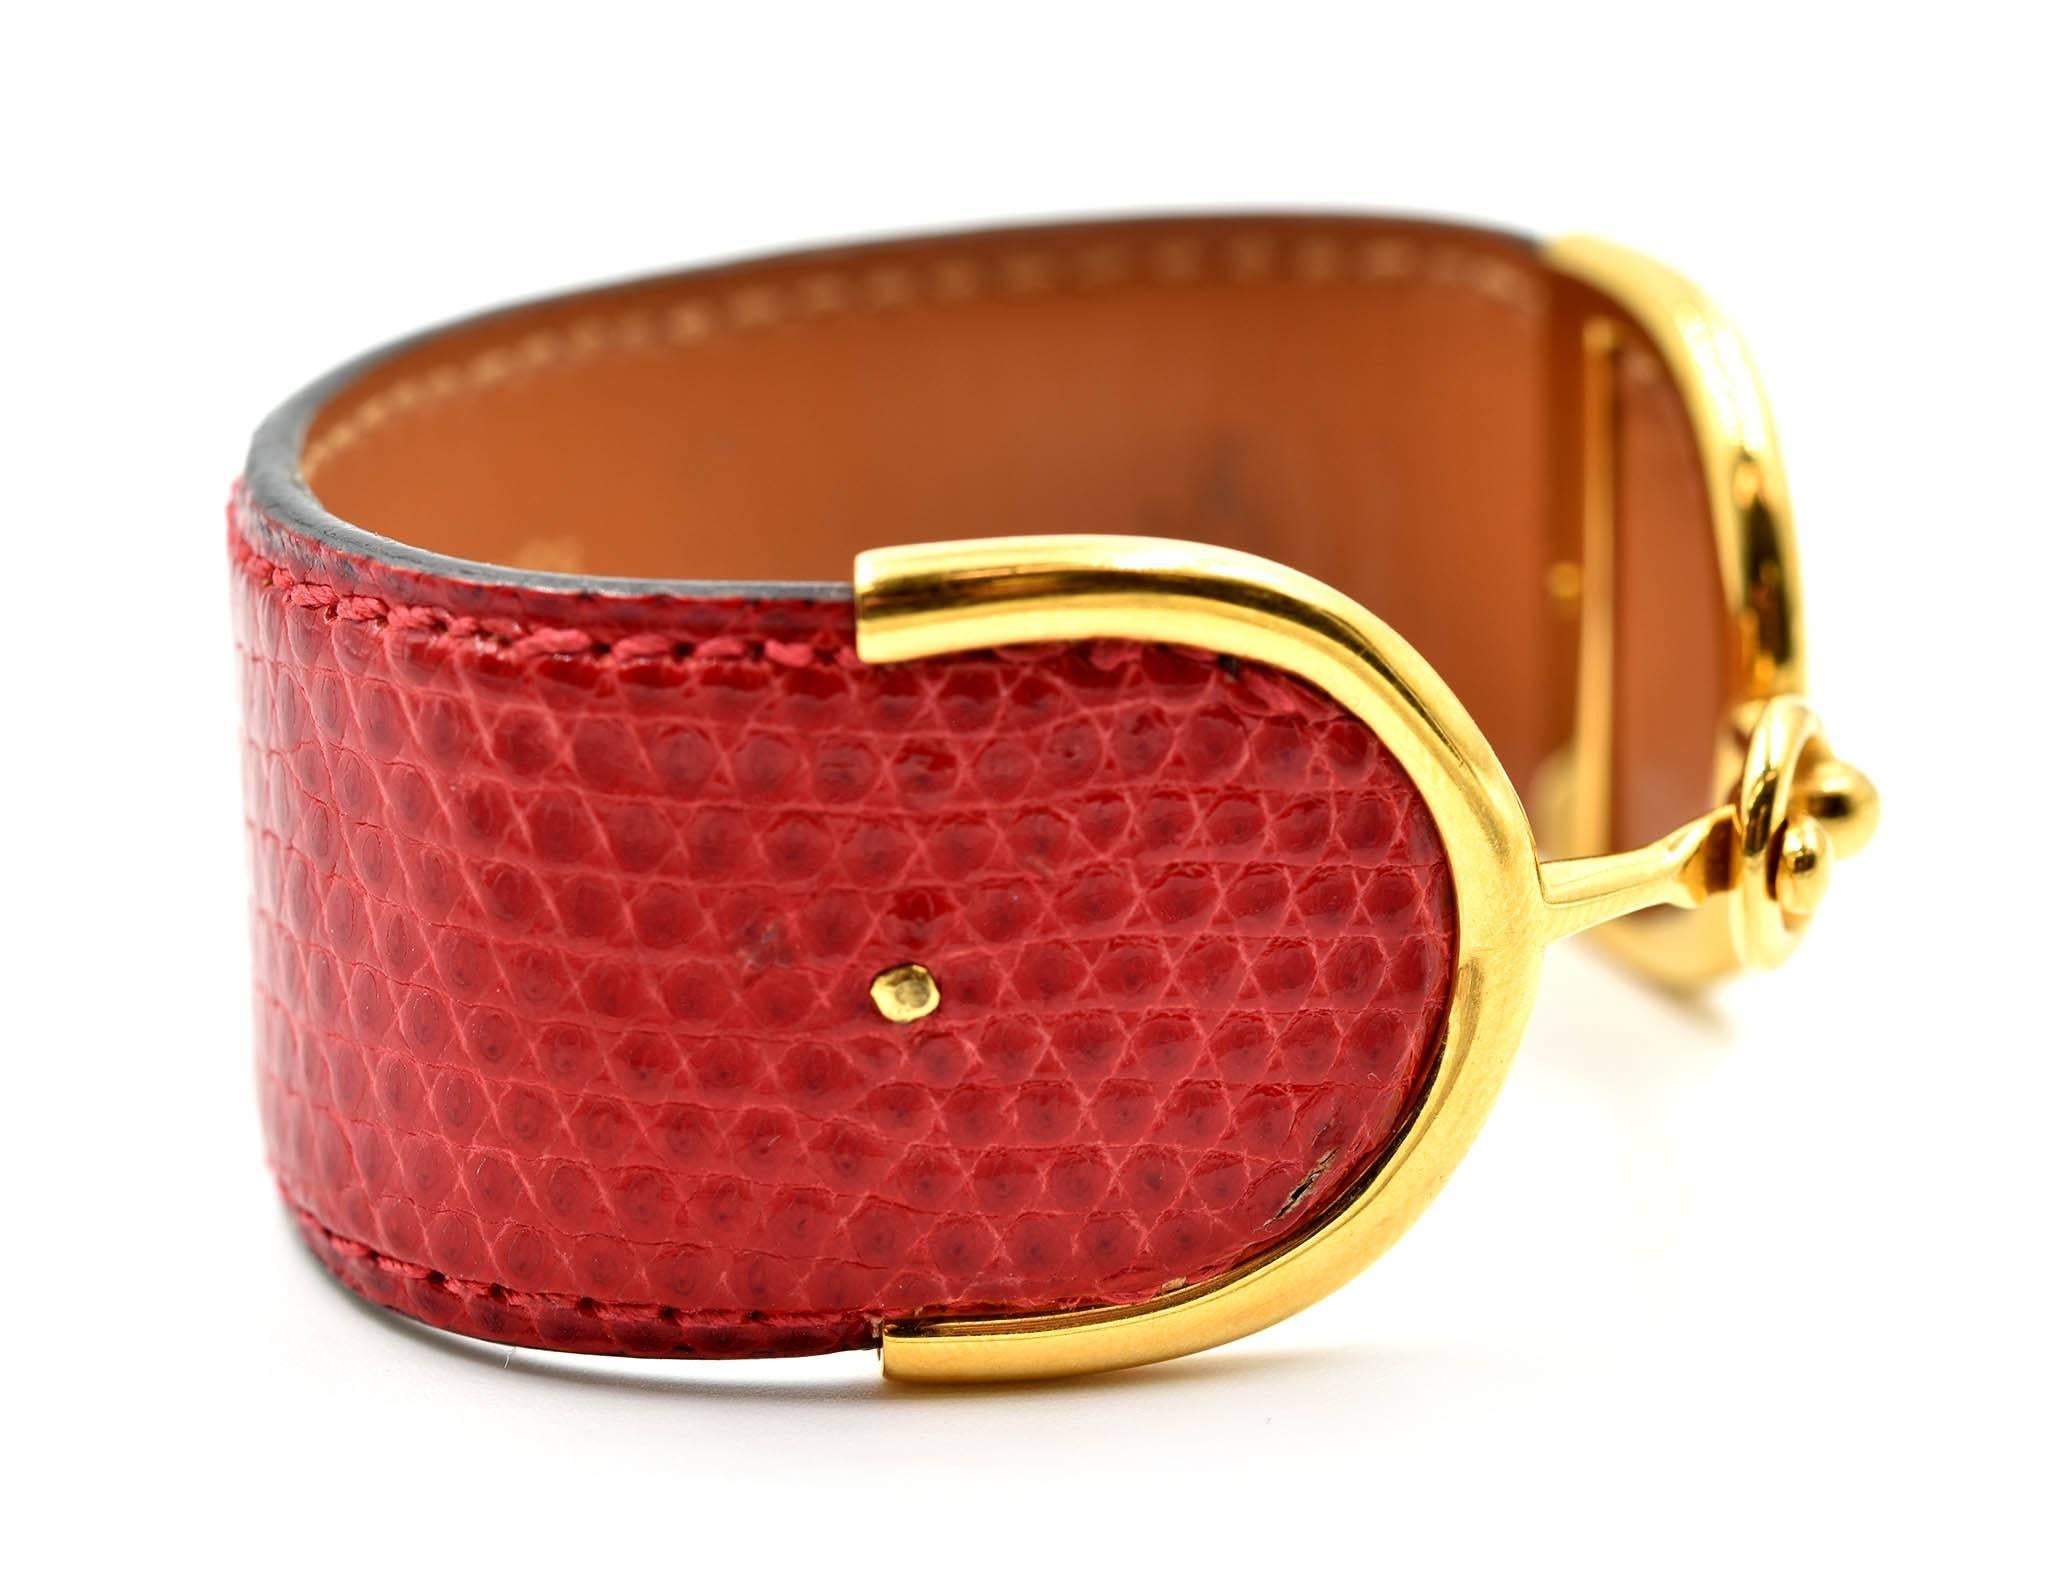 Designer: Hermes
Circa: 1960s
Material: 18k yellow gold with bright red reptile skin exterior
Dimensions: 6 ½ inches long and 1 inch wide
Weight: 76.10 grams
